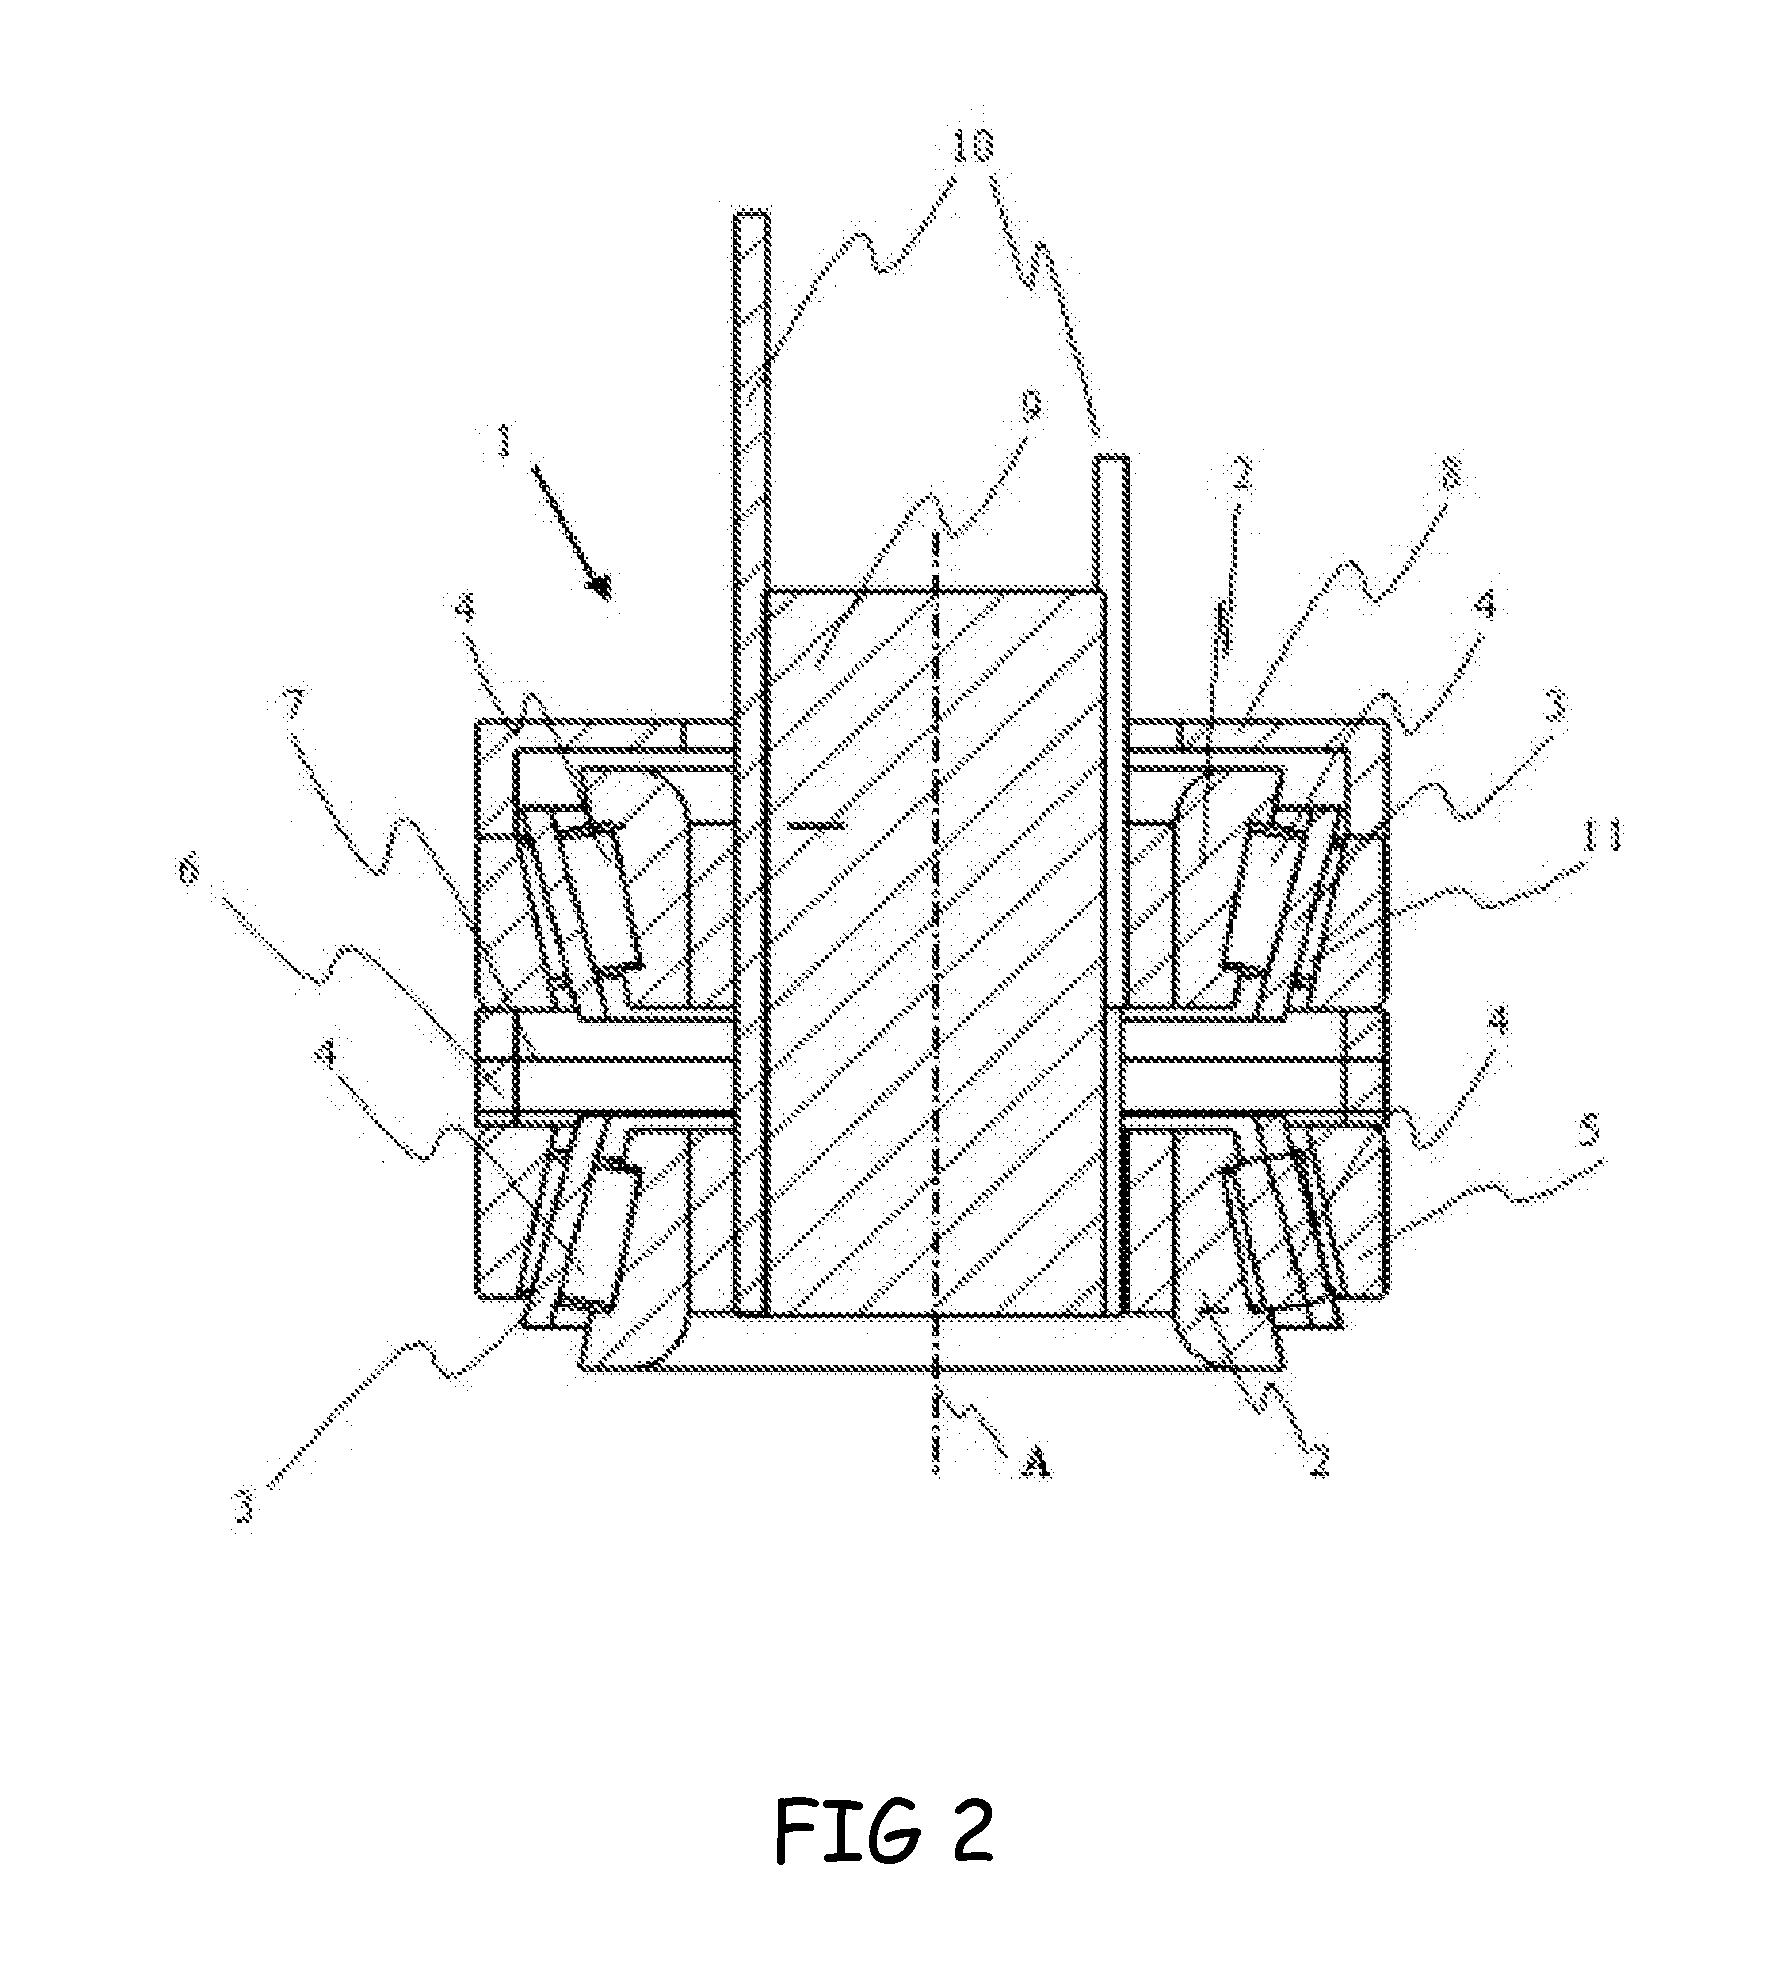 Durable and Wearless Rotating Conductor Assembly Based on an Internal Magnetic Field for Transmitting Voltage and Current